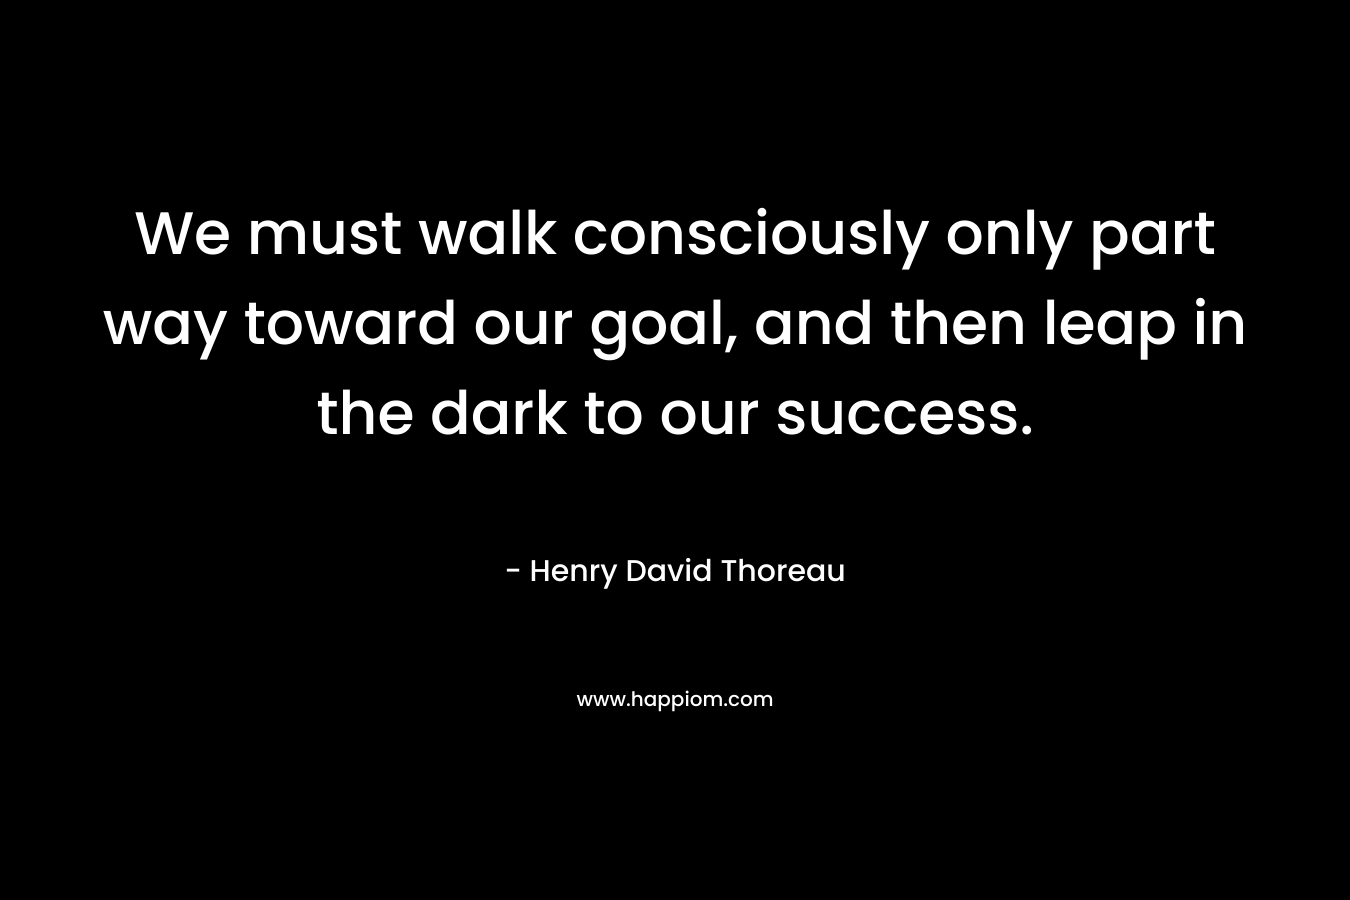 We must walk consciously only part way toward our goal, and then leap in the dark to our success. – Henry David Thoreau